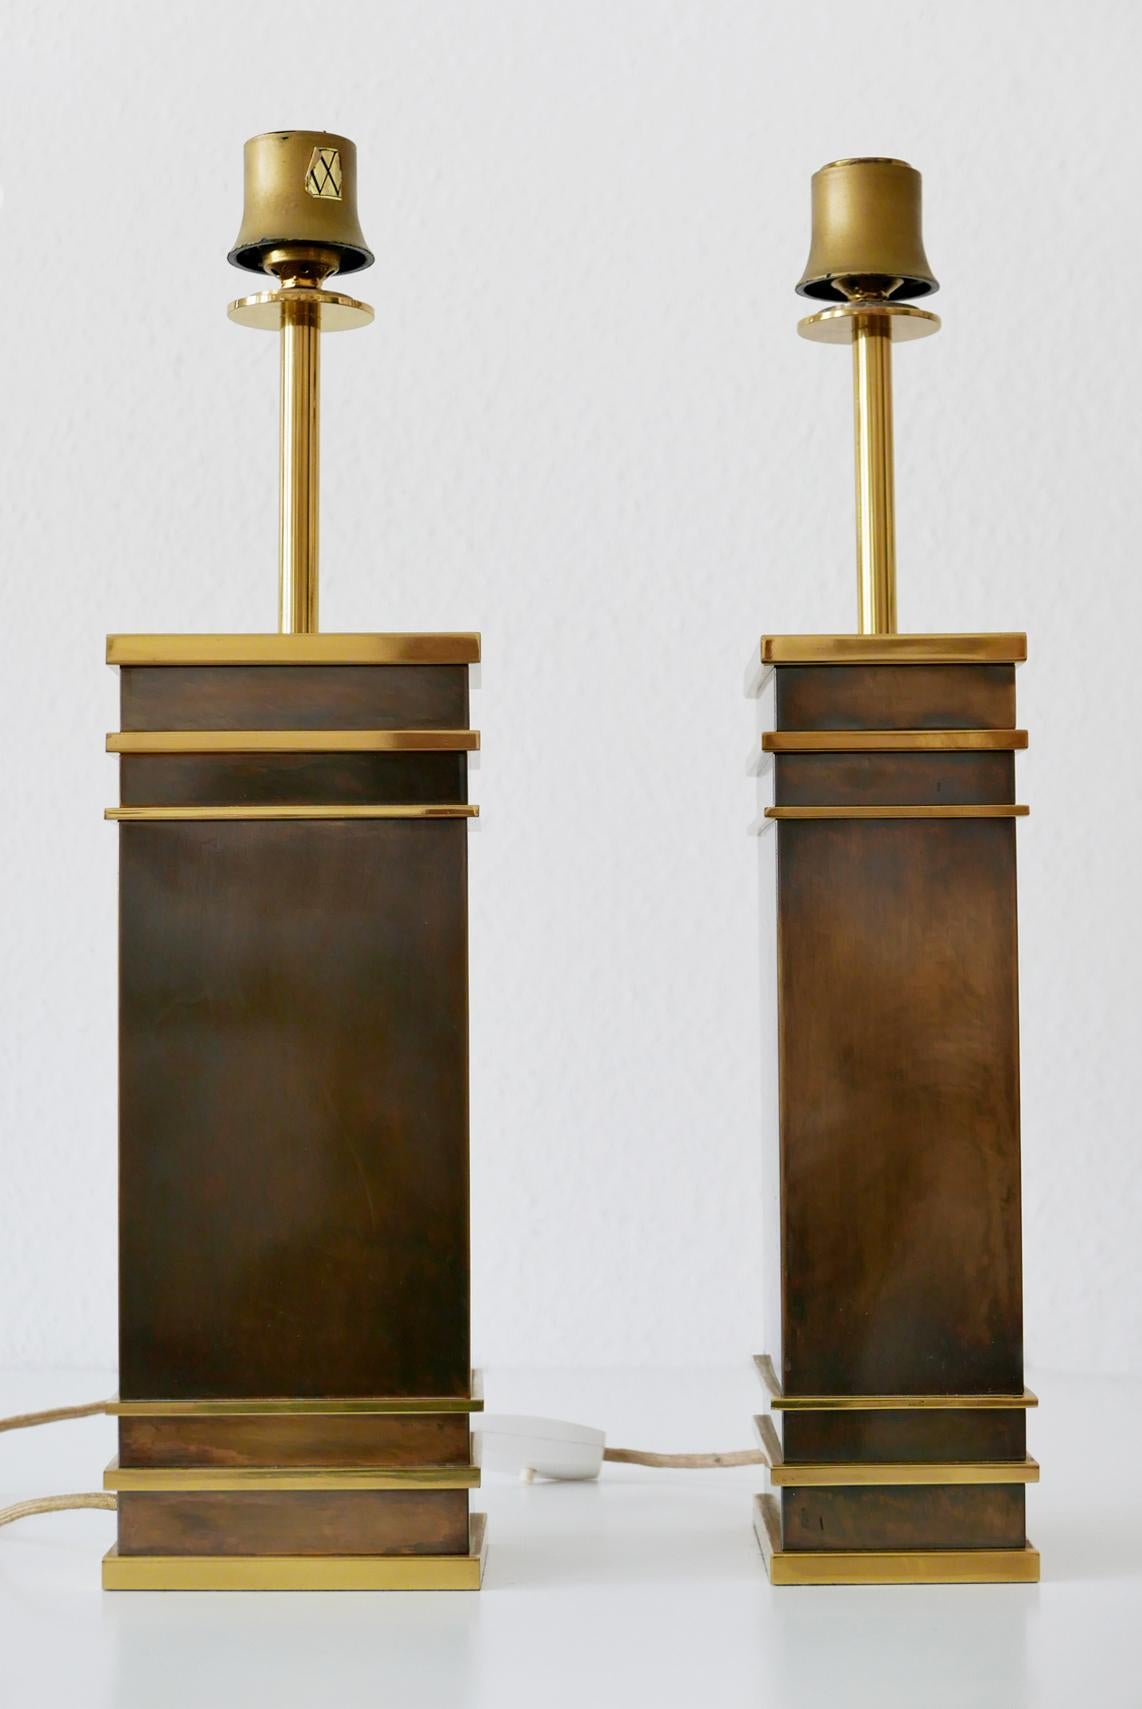 Set of two monumental and extremely rare Mid-Century Modern table lamps in heavy, massive brass. Designed and manufactured by Vereinigte Werkstätten, 1960s, Germany. One lamp with makers mark.

These sculptural table lamps are executed in massive